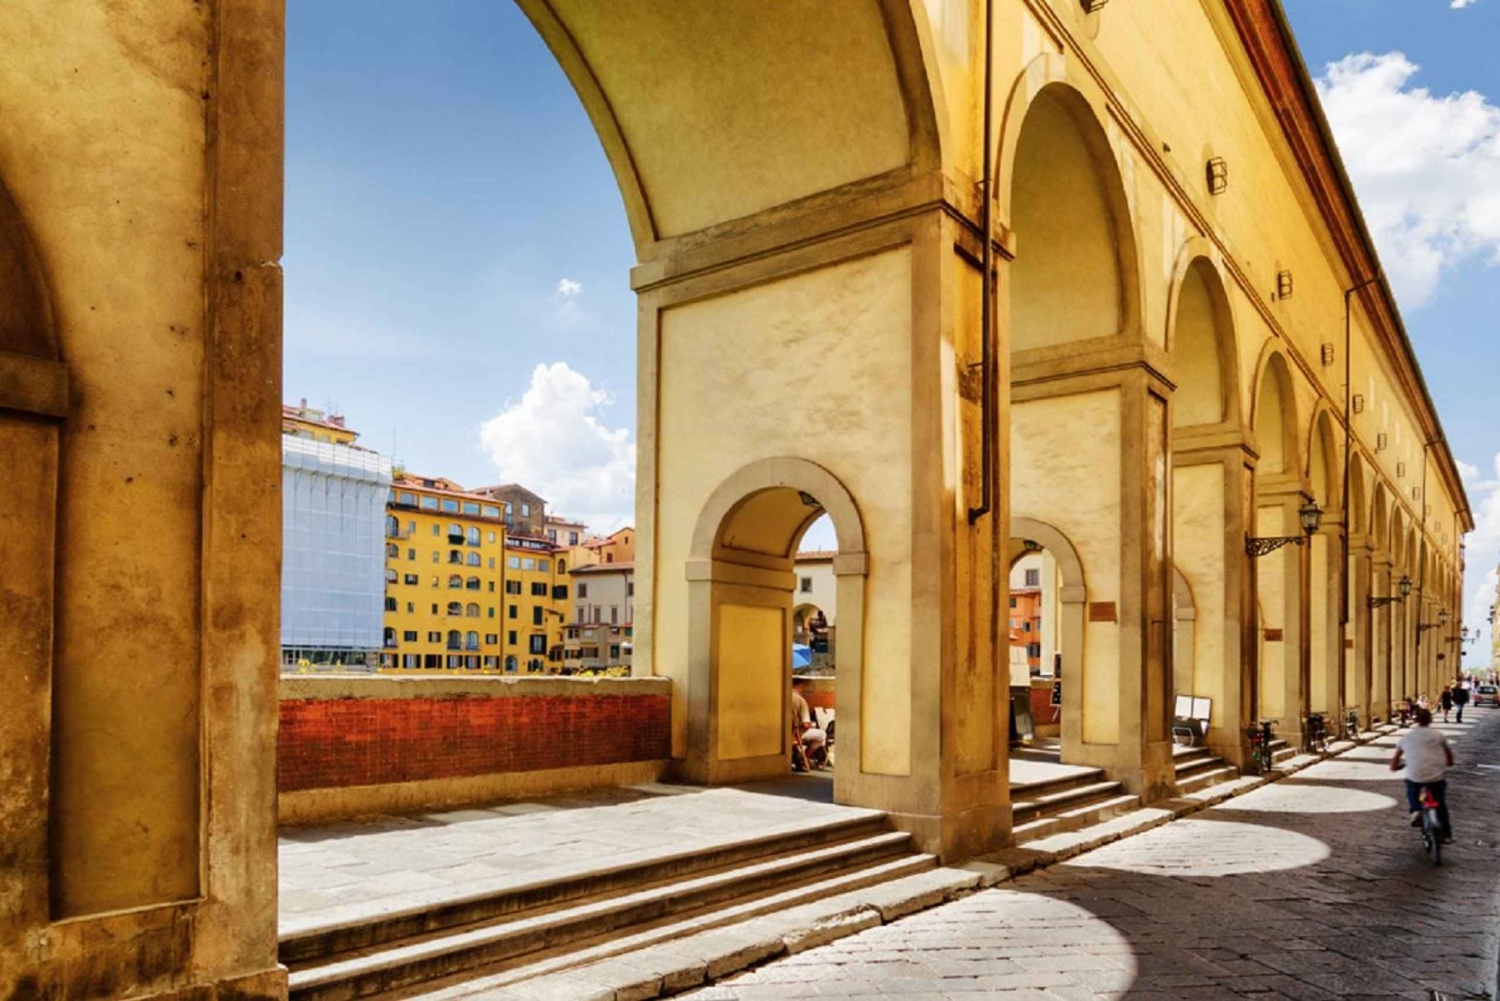 From Rome: Uffizi & Florence Guided Tour